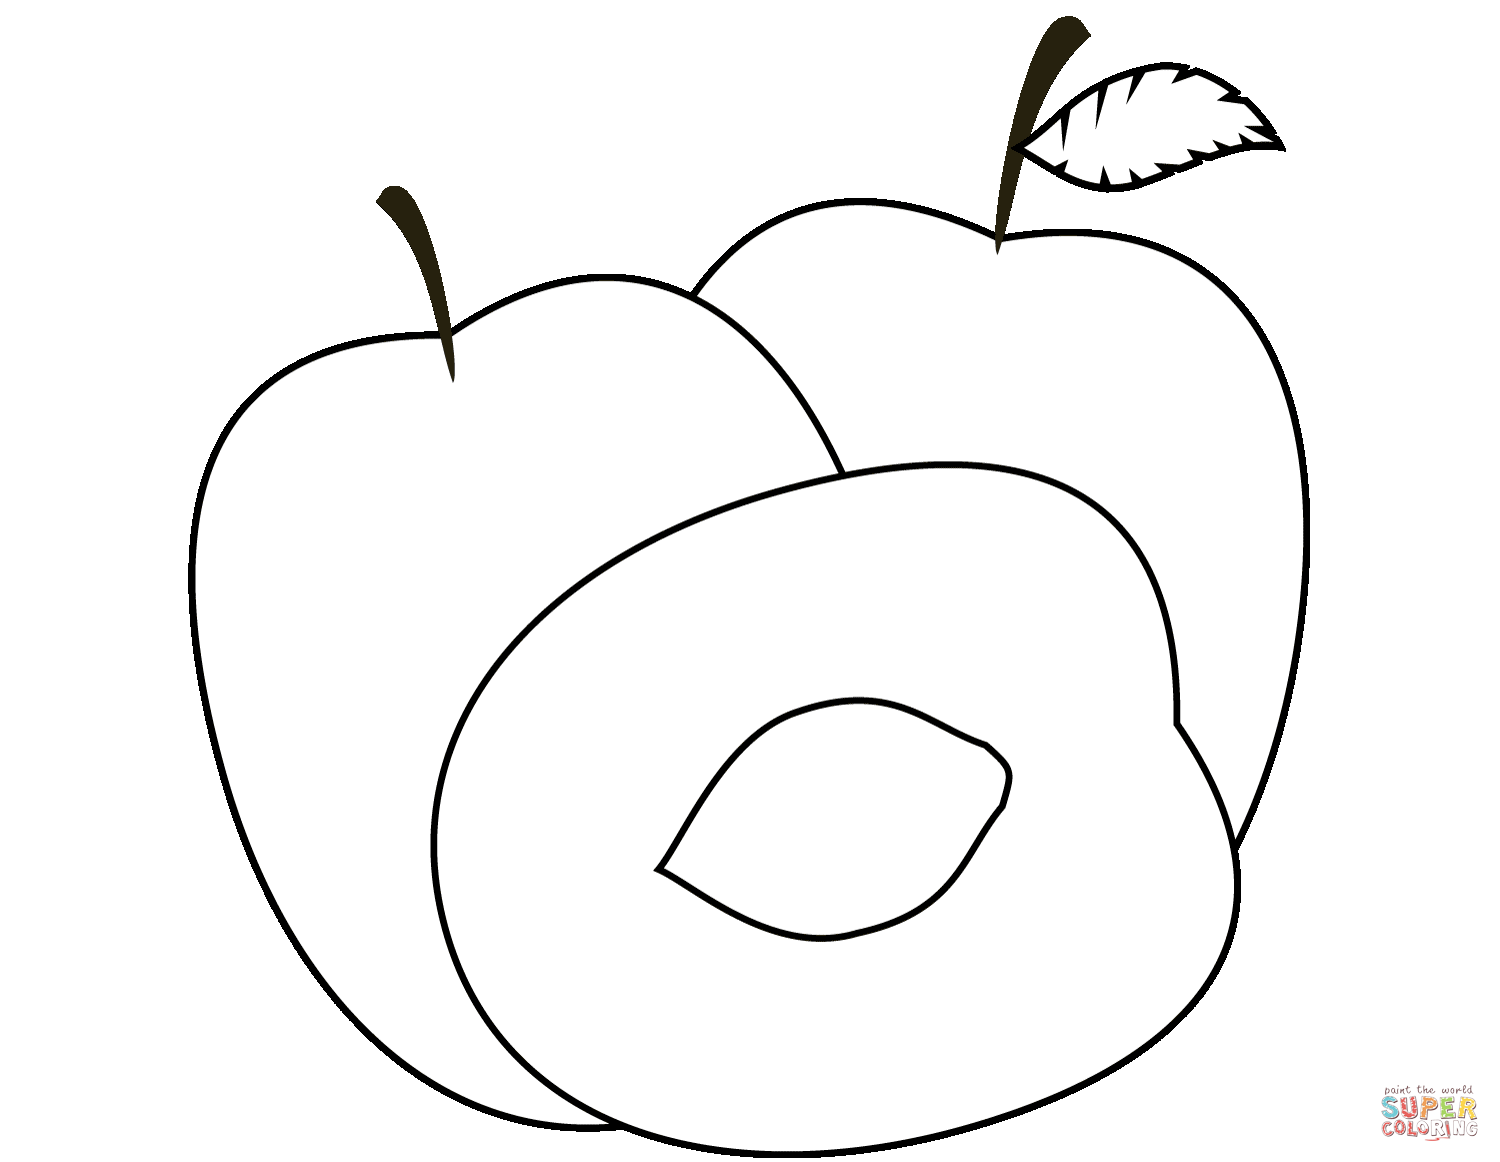 Plums coloring page | Free Printable Coloring Pages